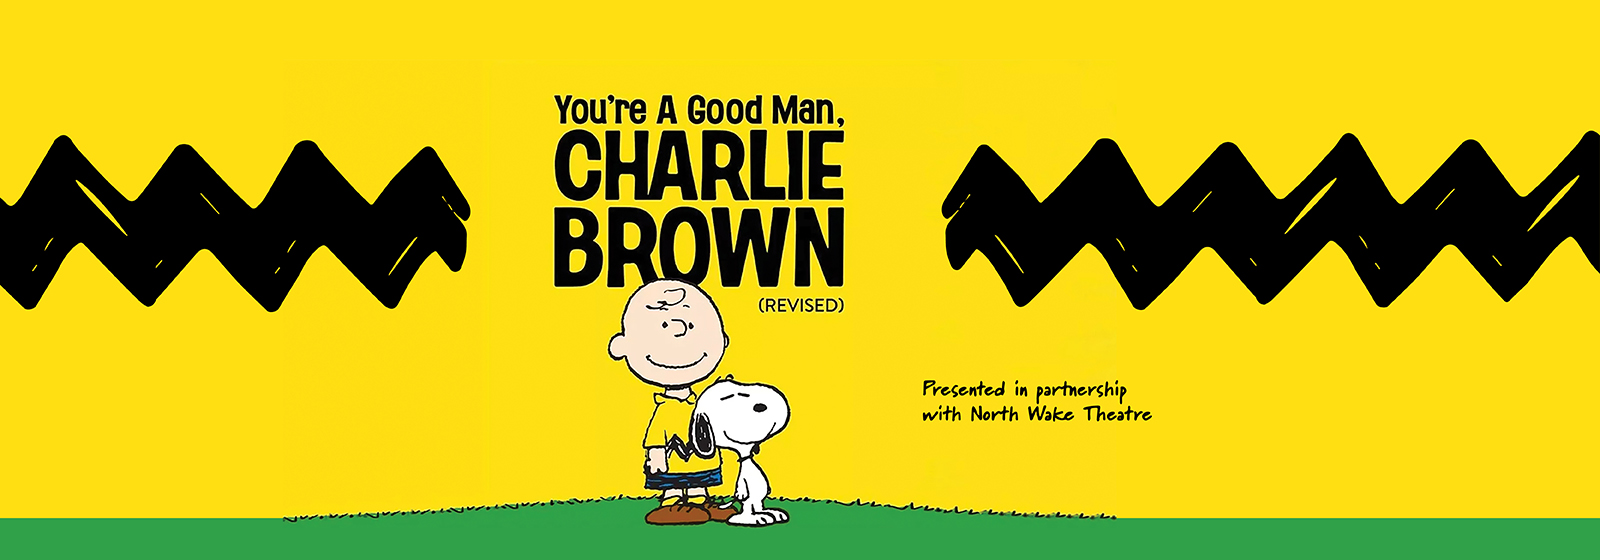 You're A Good Man Charlie Brown (Revised)